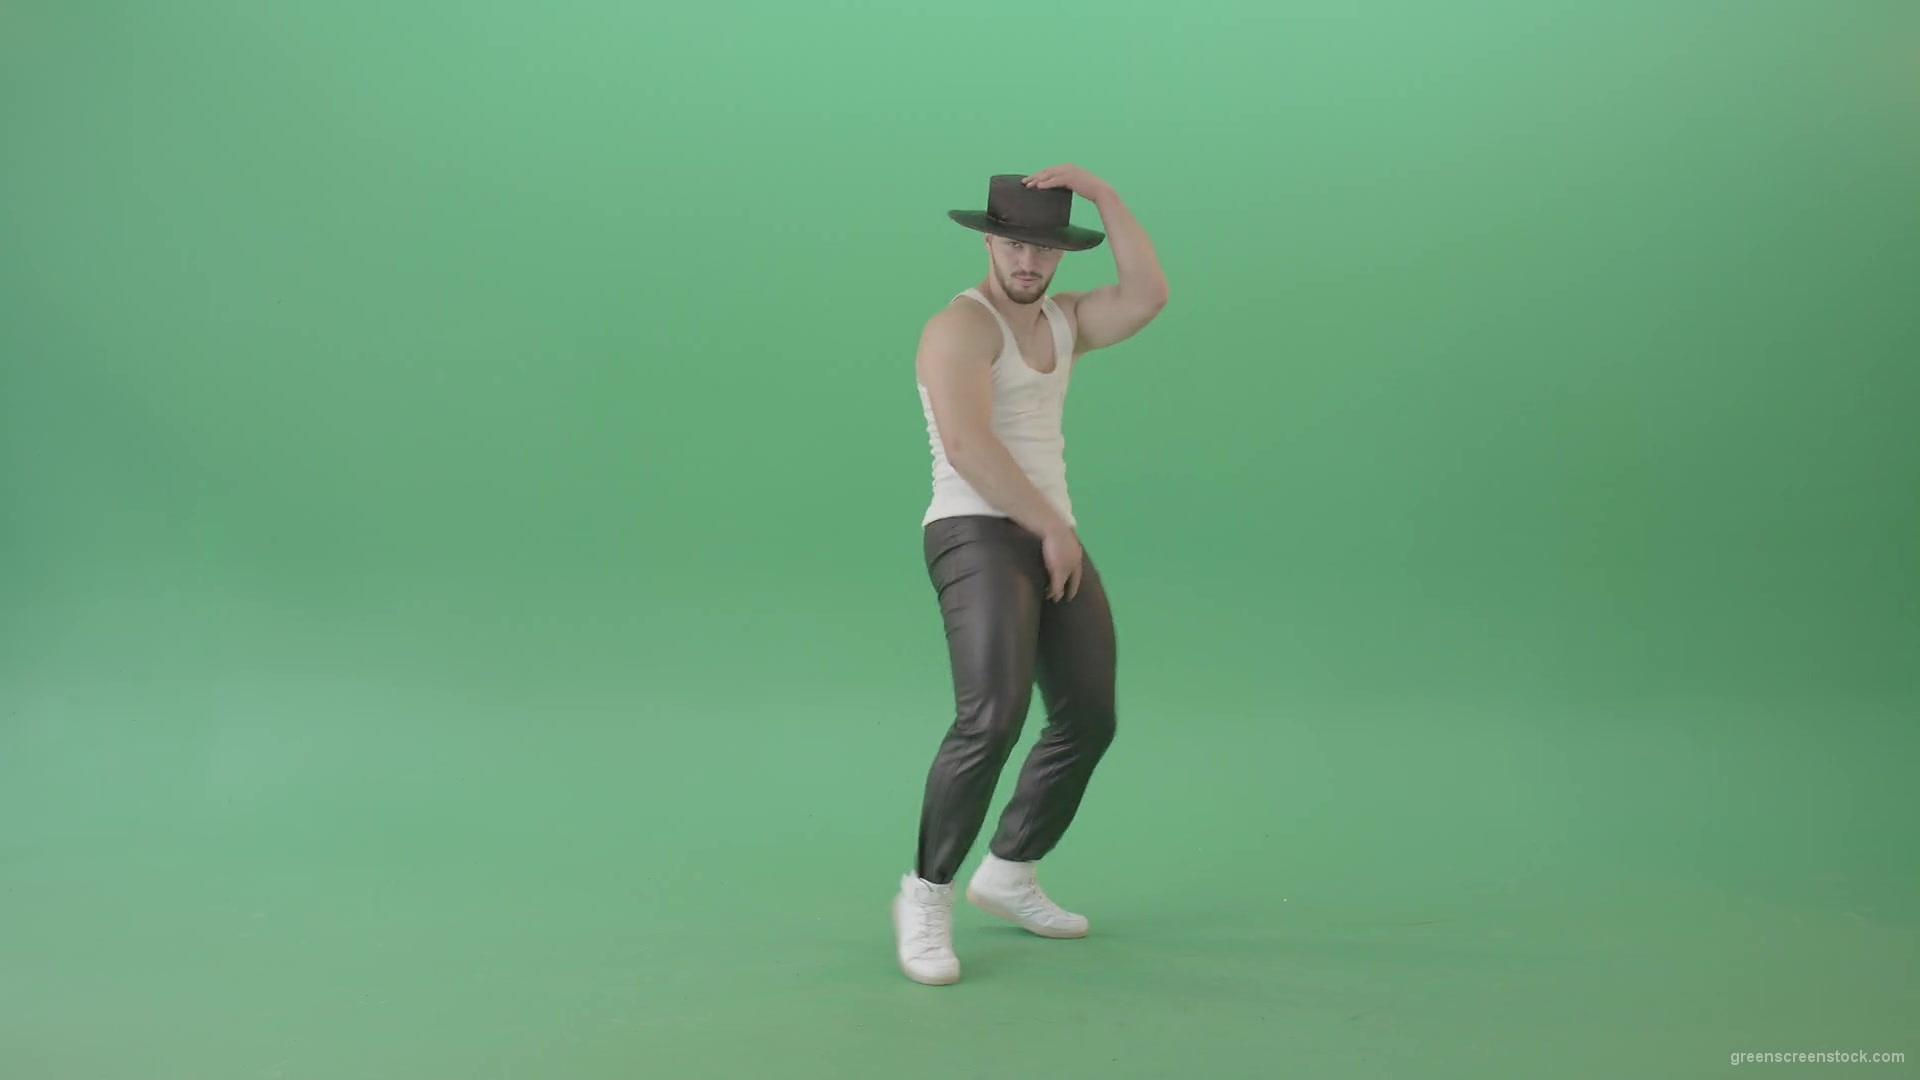 Michael-Jackson-Turn-spinning-and-dance-by-funny-man-isolated-on-Green-Screen-4K-Video-Footage-1920_006 Green Screen Stock